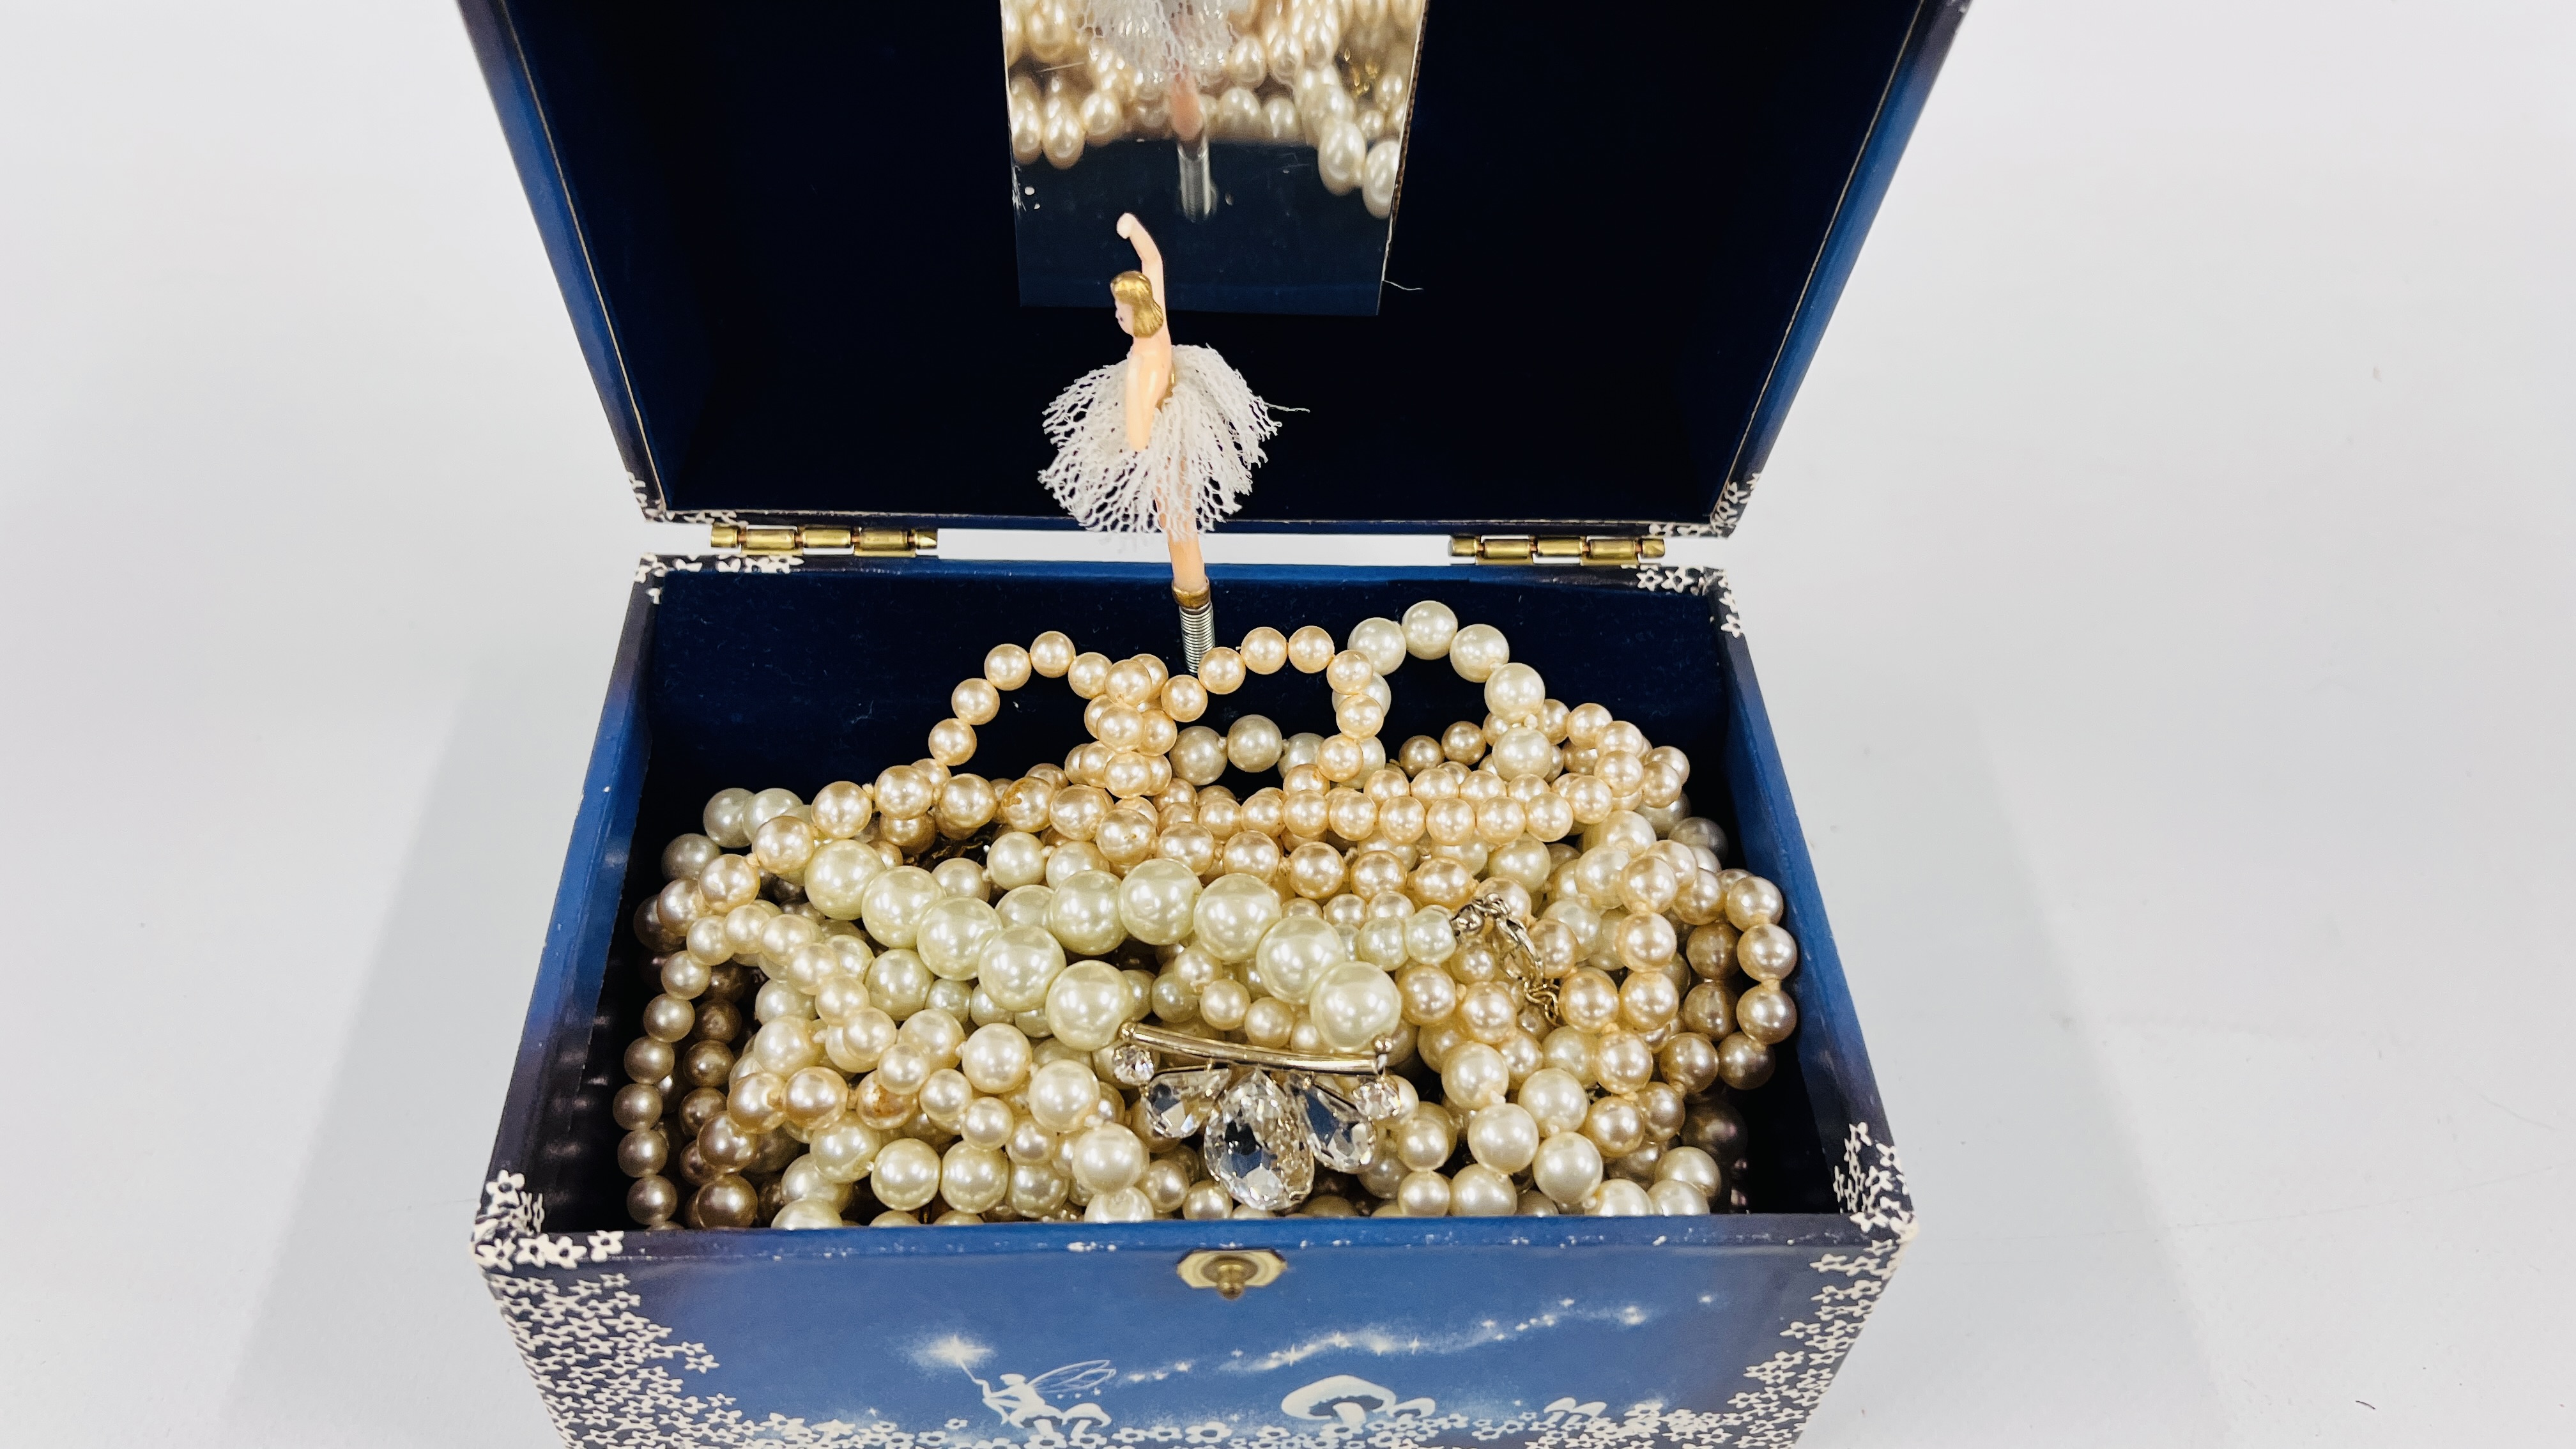 SELECTION OF SILVERTONE COSTUME JEWELLERY ALONG WITH A JEWELLERY BOX FULL OF BEADED NECKLACES. - Image 12 of 12